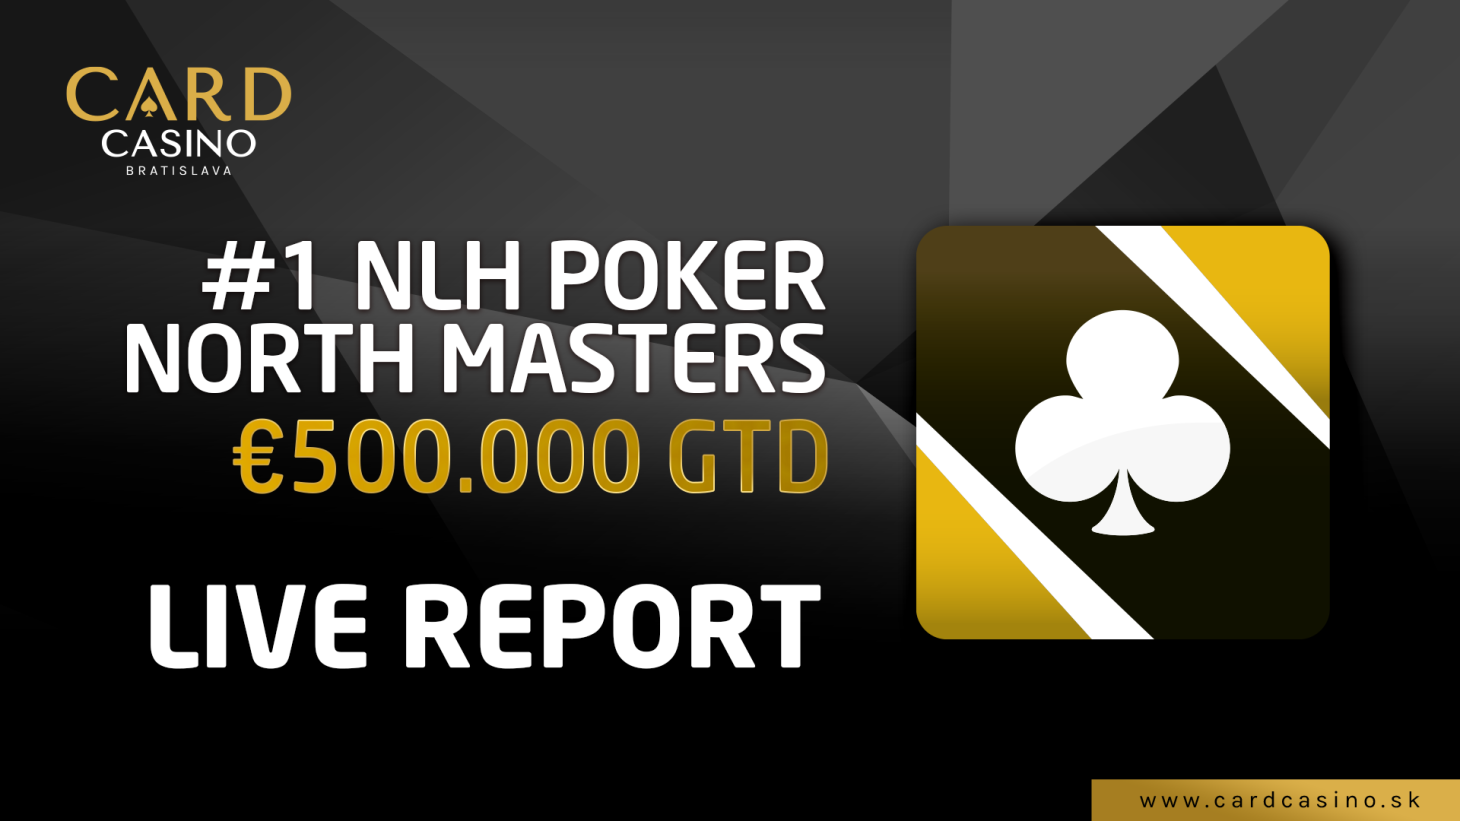 LIVE REPORT: NORTH MASTERS Day 2